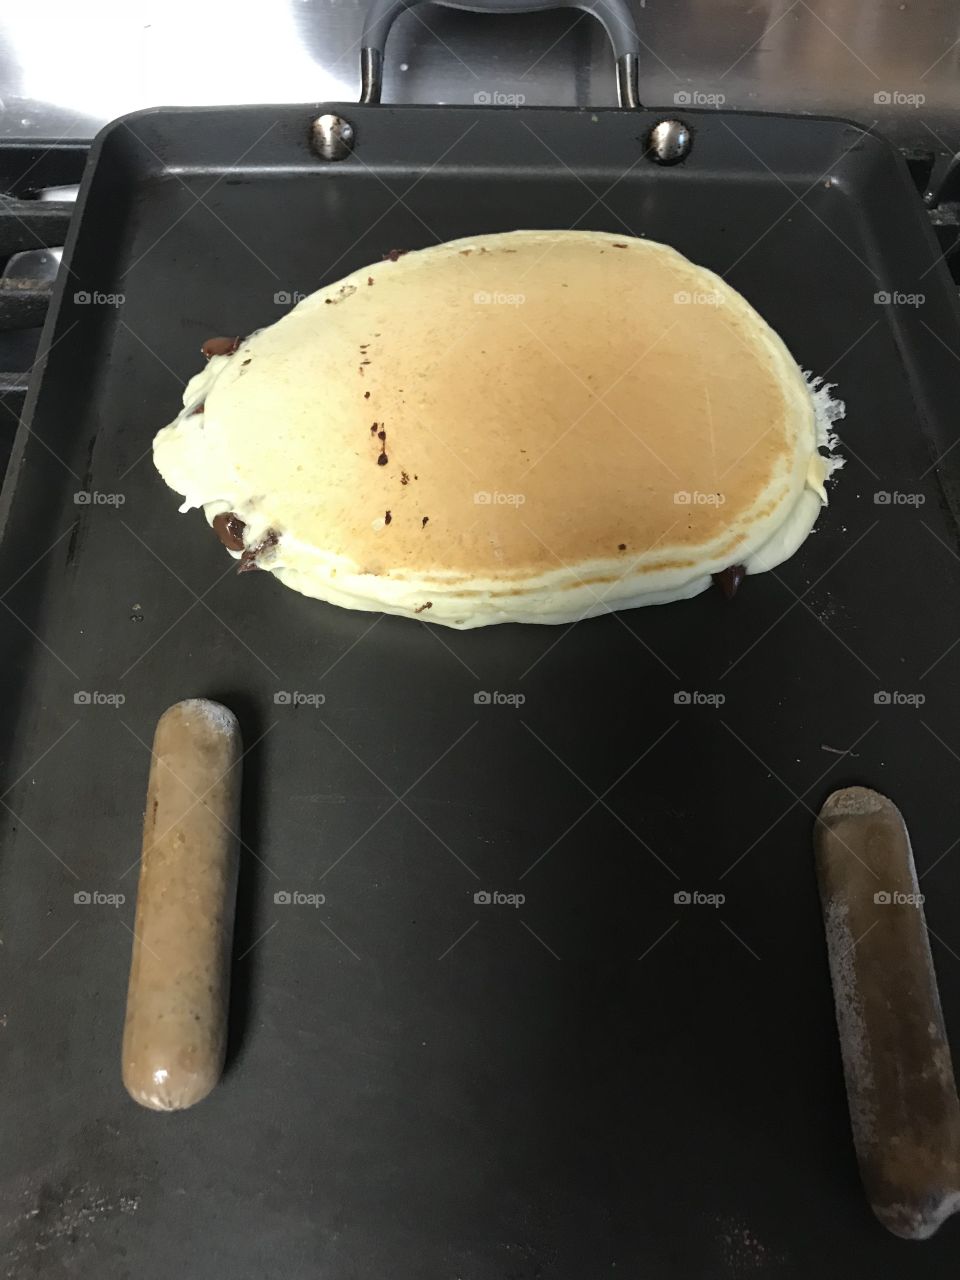 Pancake and sausage on the grill 